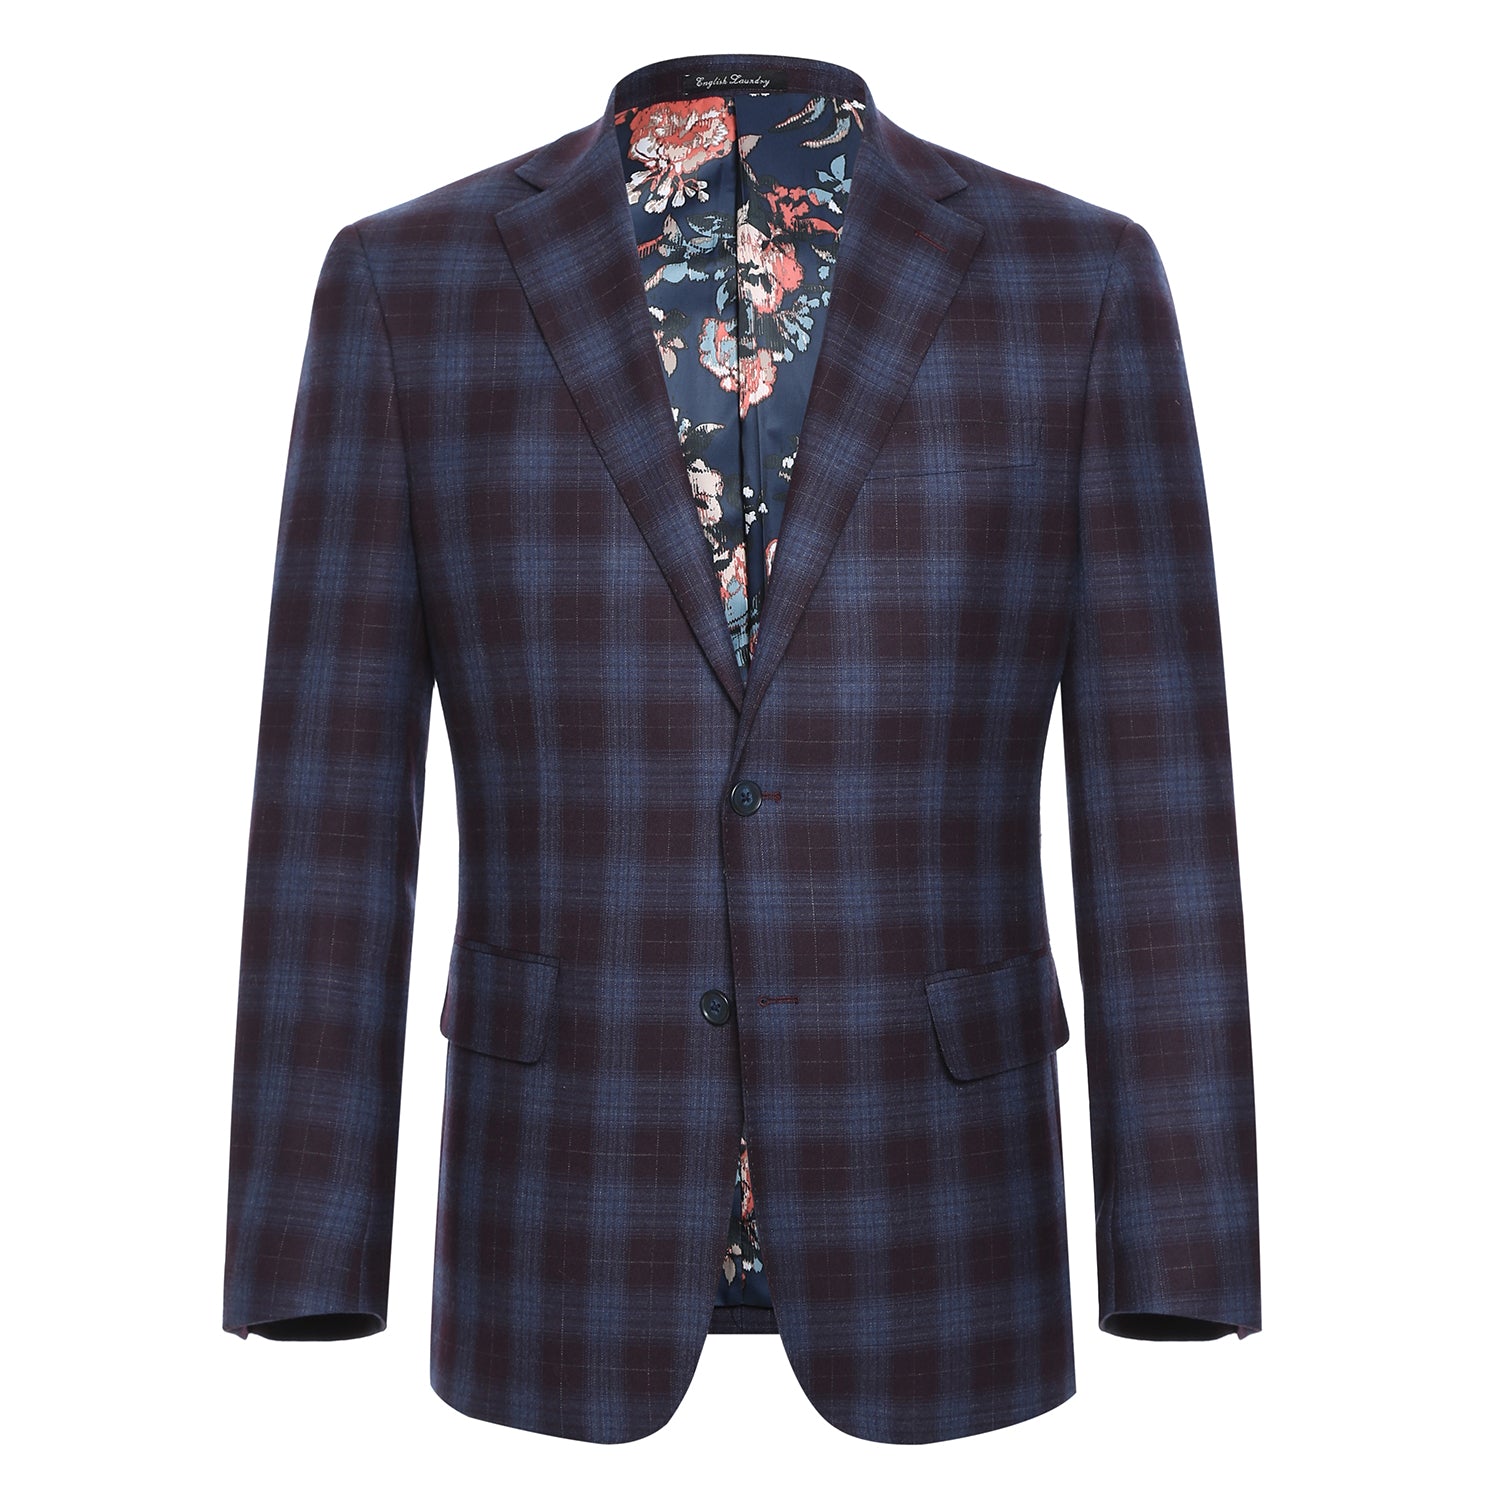 English Laundry Blue with Black Check Wool Suit 2